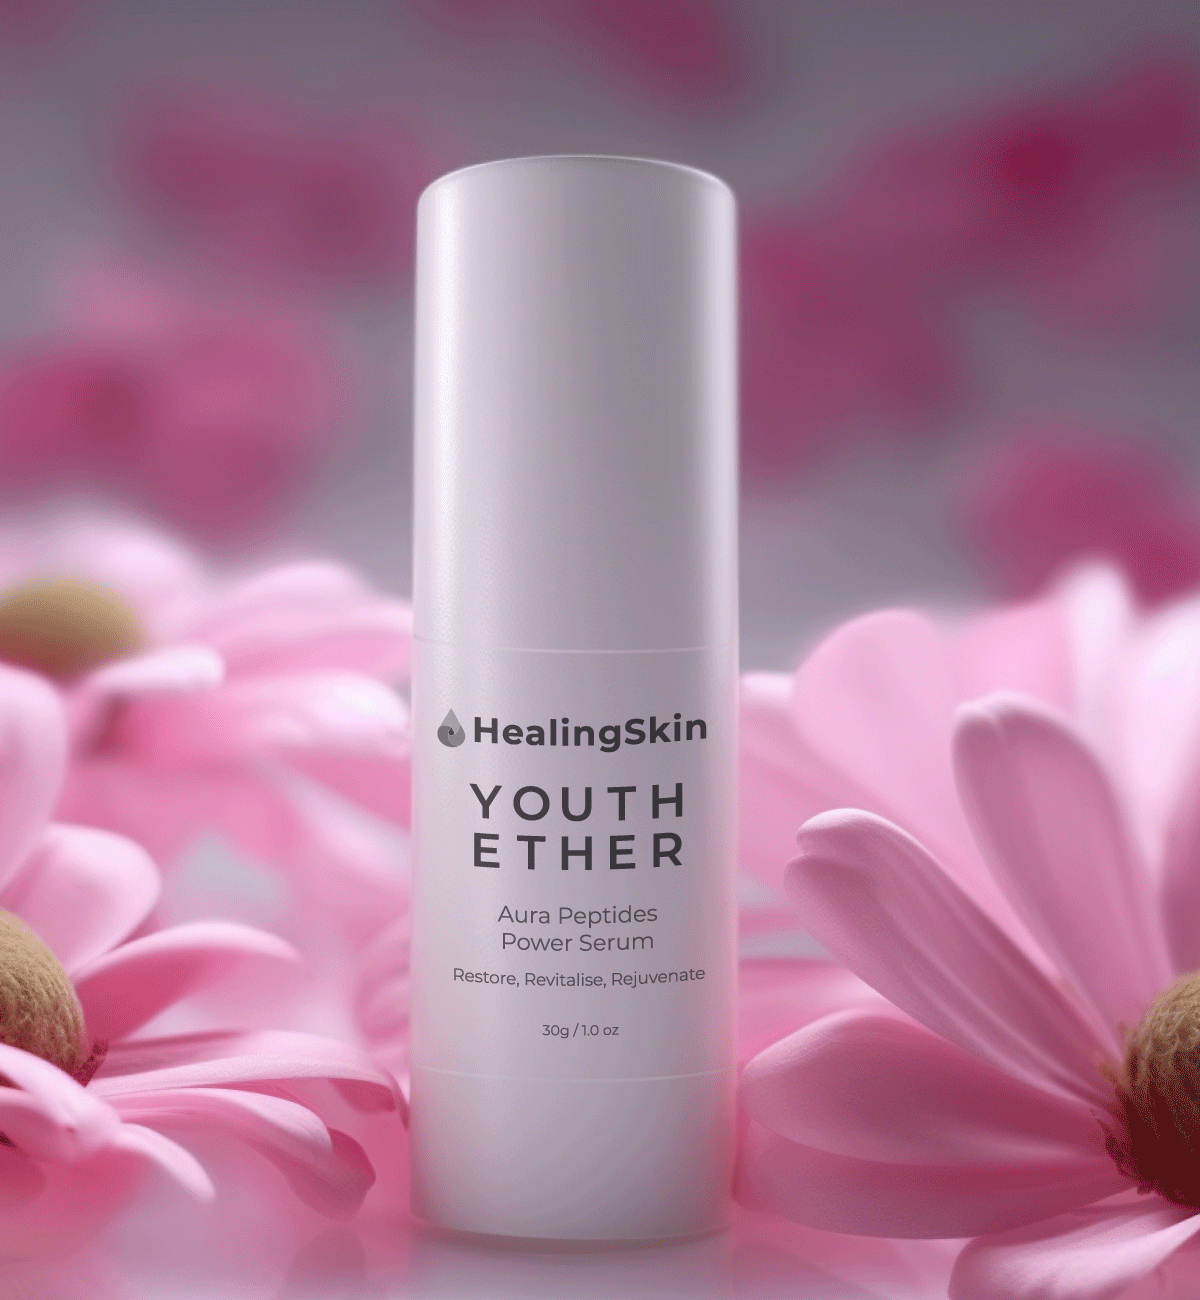 Youth Ether Aura Peptides Power Serum contains aurapeptides that restore, revitalise and rejuvenate your skin.